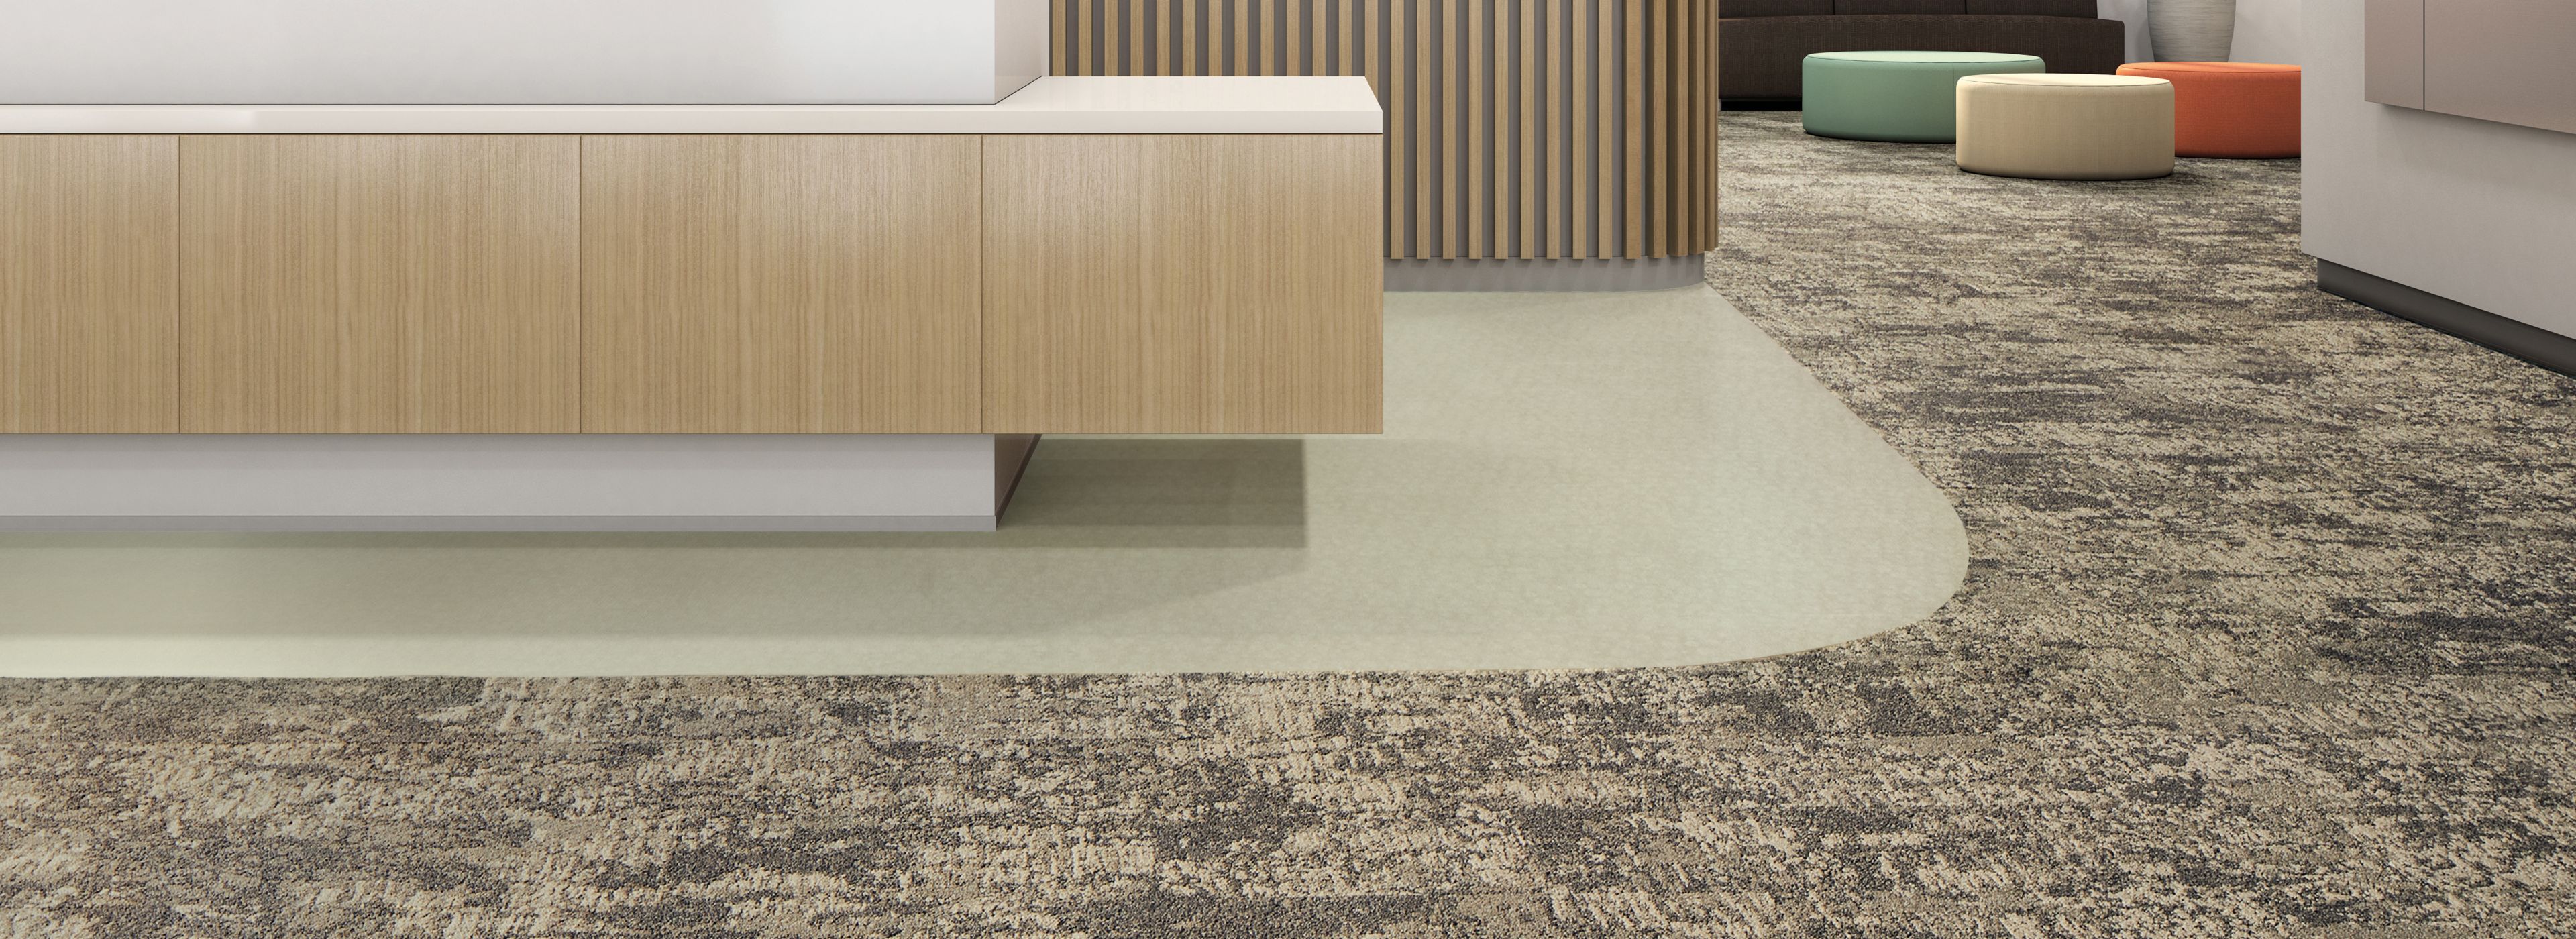 Interface Cactus Makes Perfect LVT and Just Deserts plank carpet tile in reception and waiting area numéro d’image 1